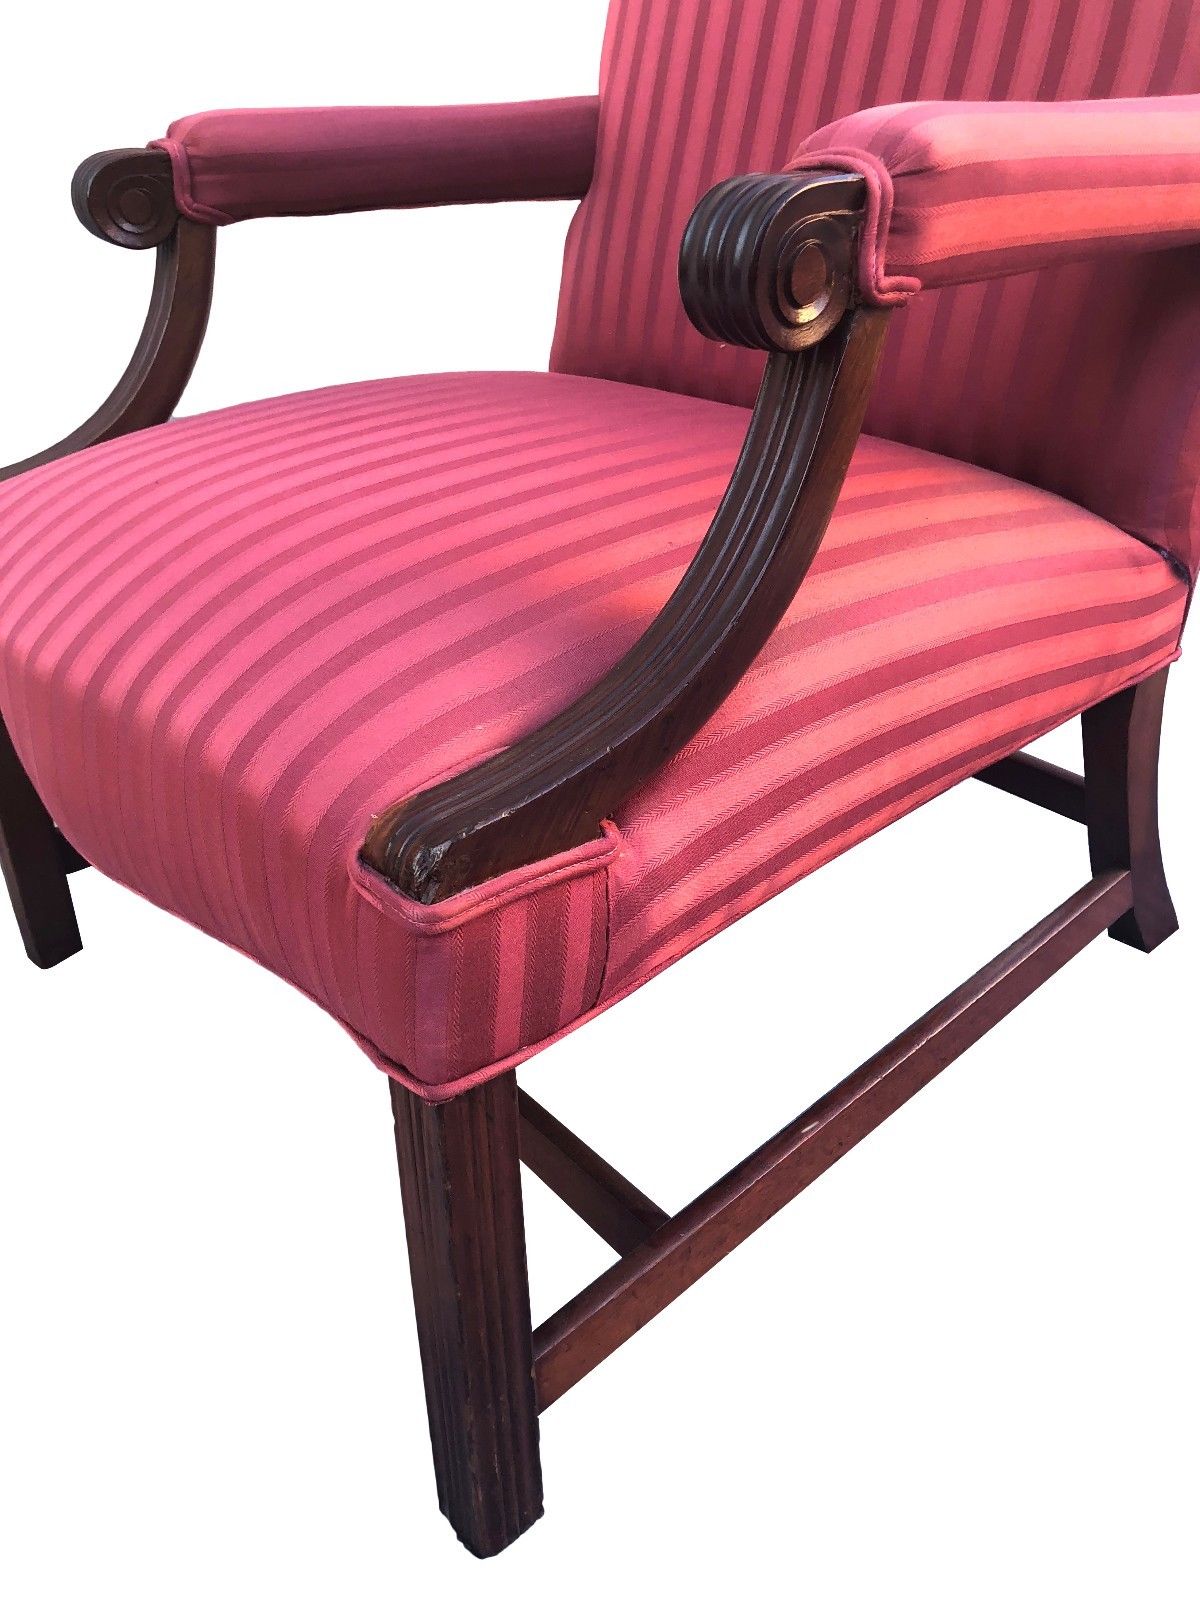 18TH CENTURY CHIPPENDALE MAHOGANY LOLLING CHAIR IN FABULOUS UPHOLSTERY